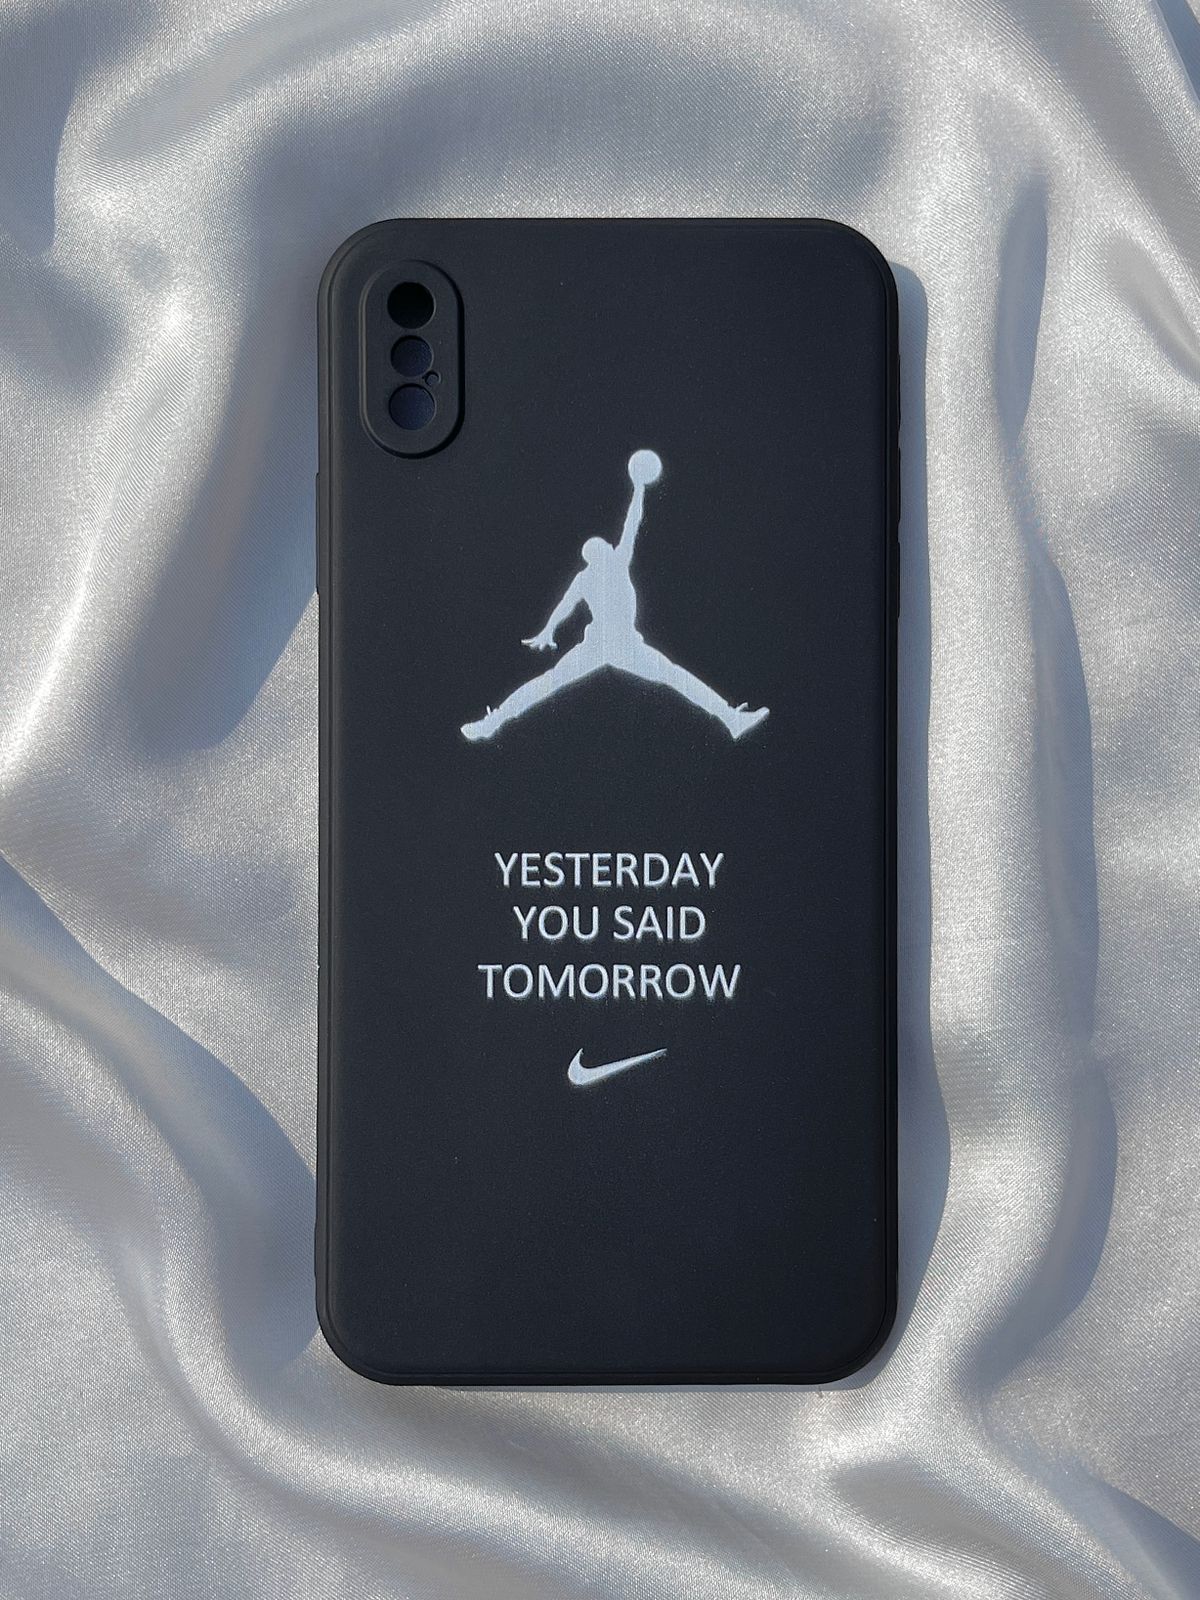 iPhone "XS Max" Silicone Case "Yesterday You Said Tomorrow" Edition